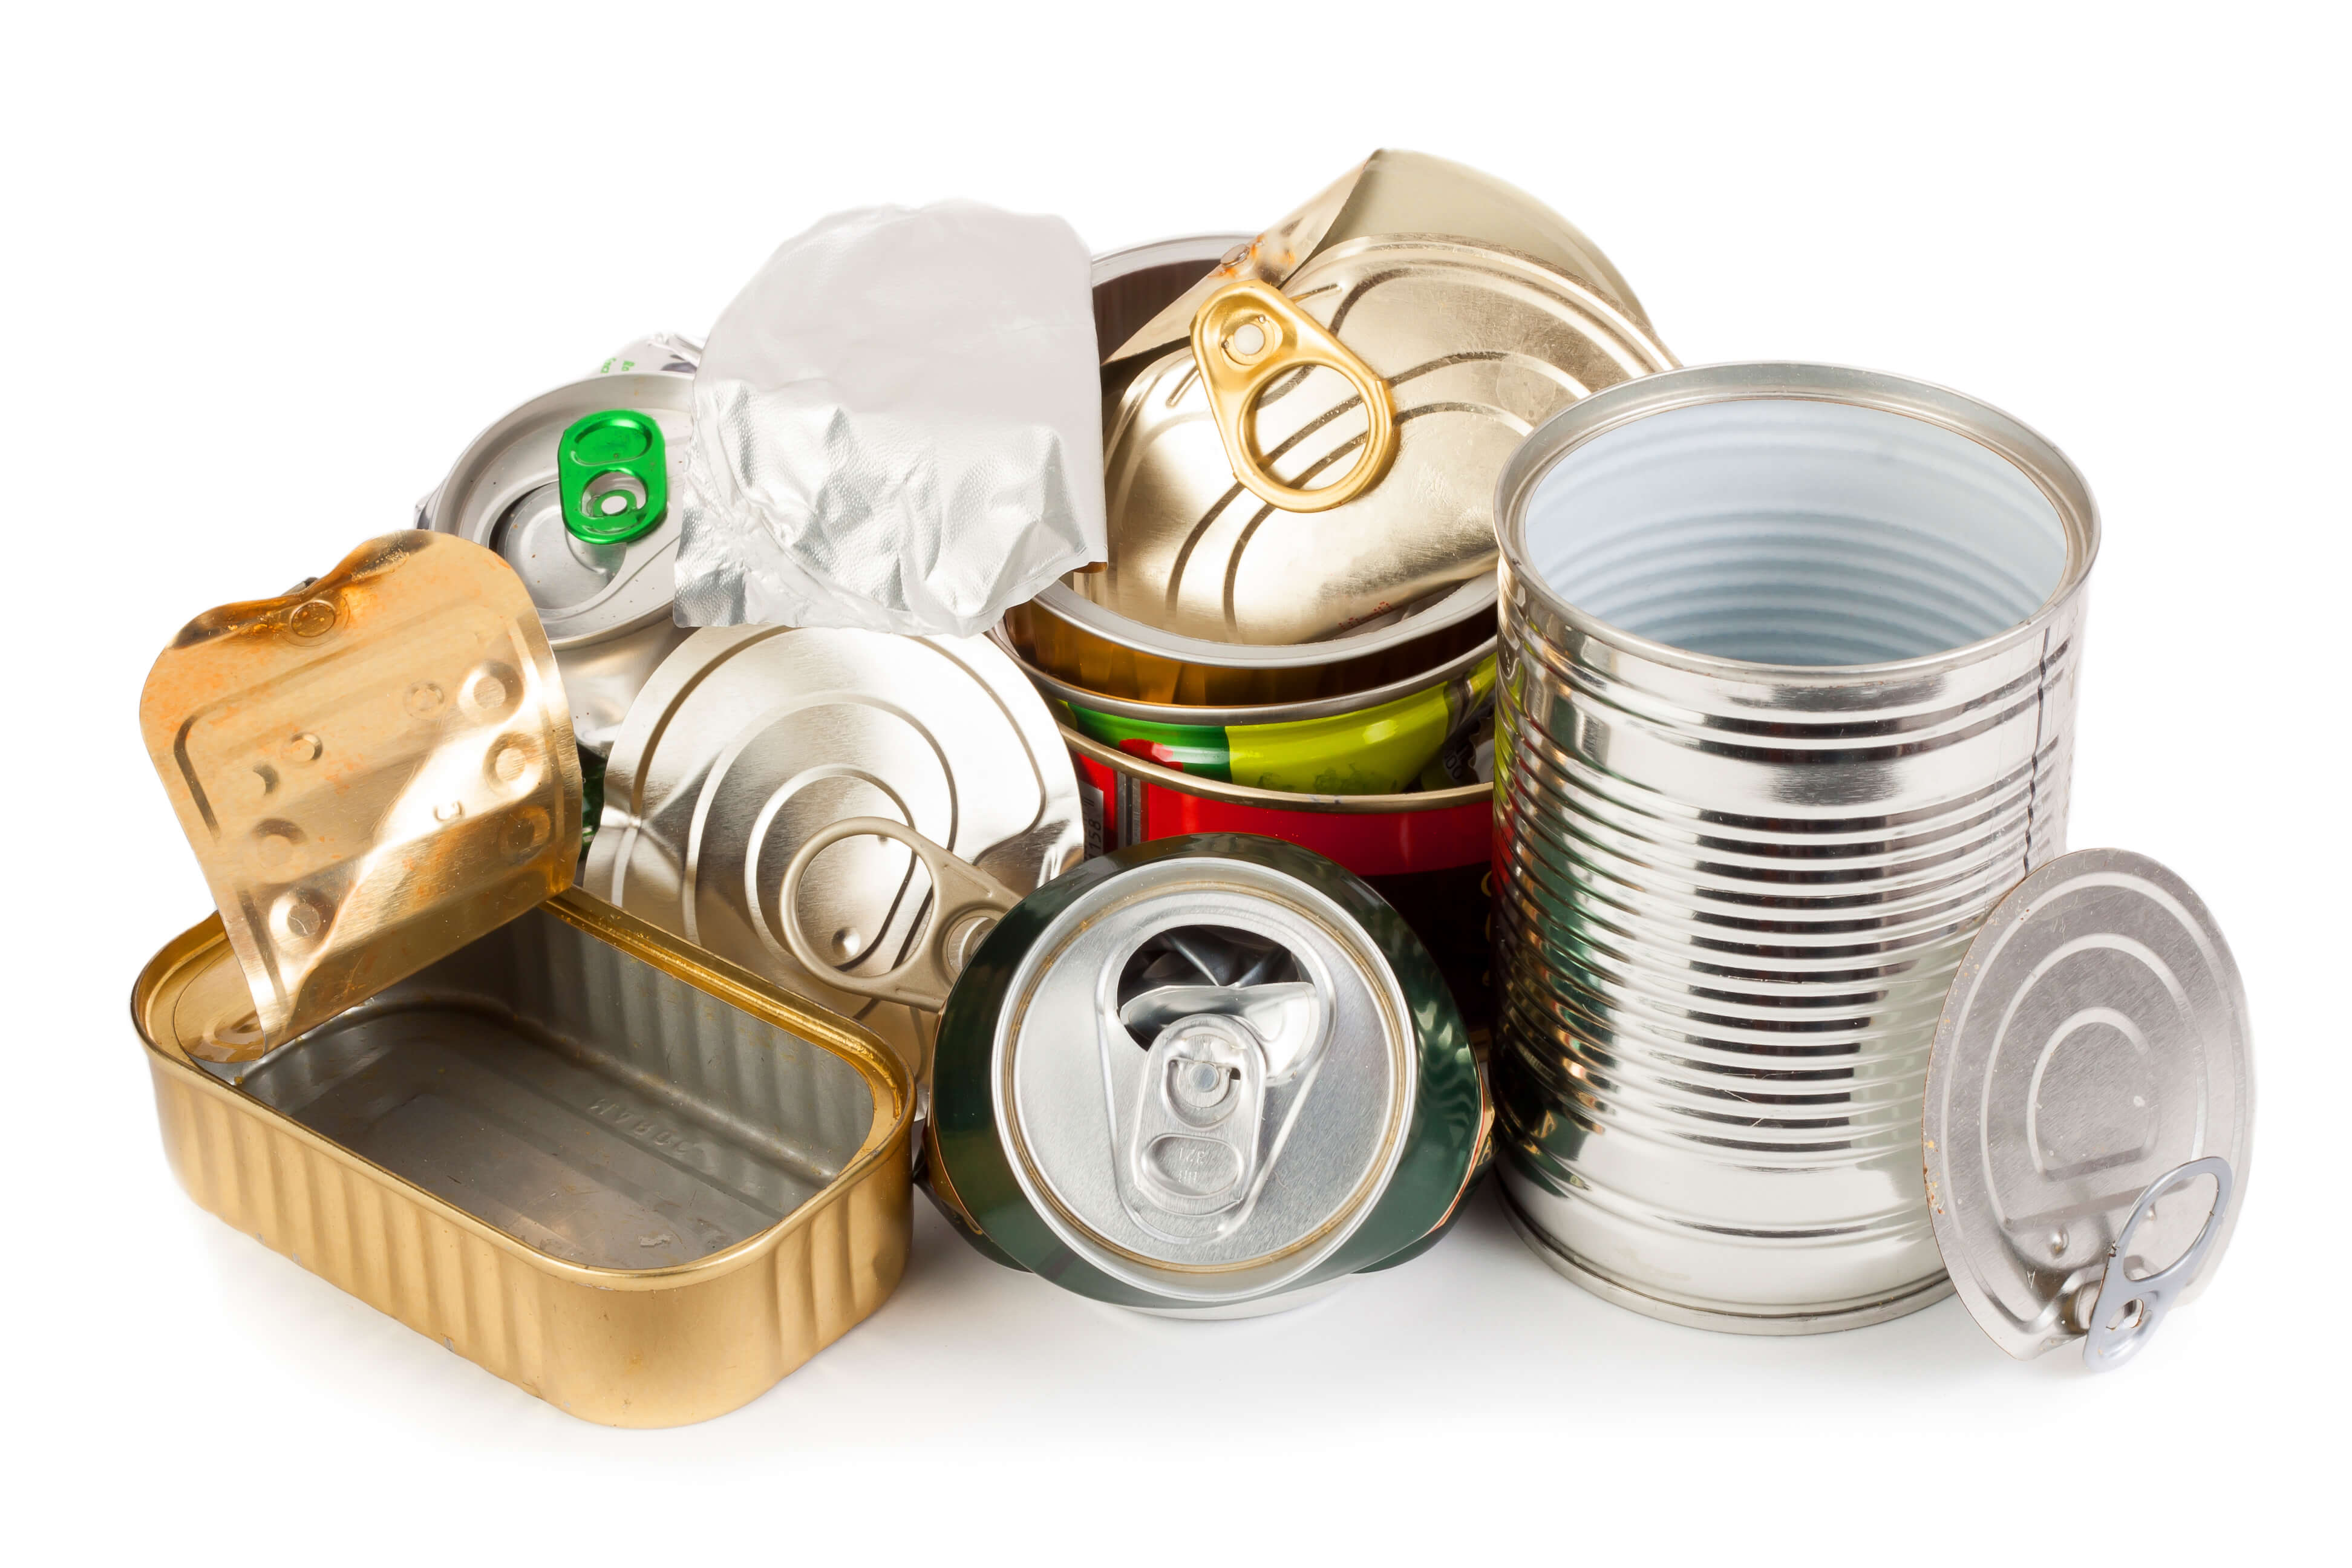 Aluminum and Steel Cans | City of Boise